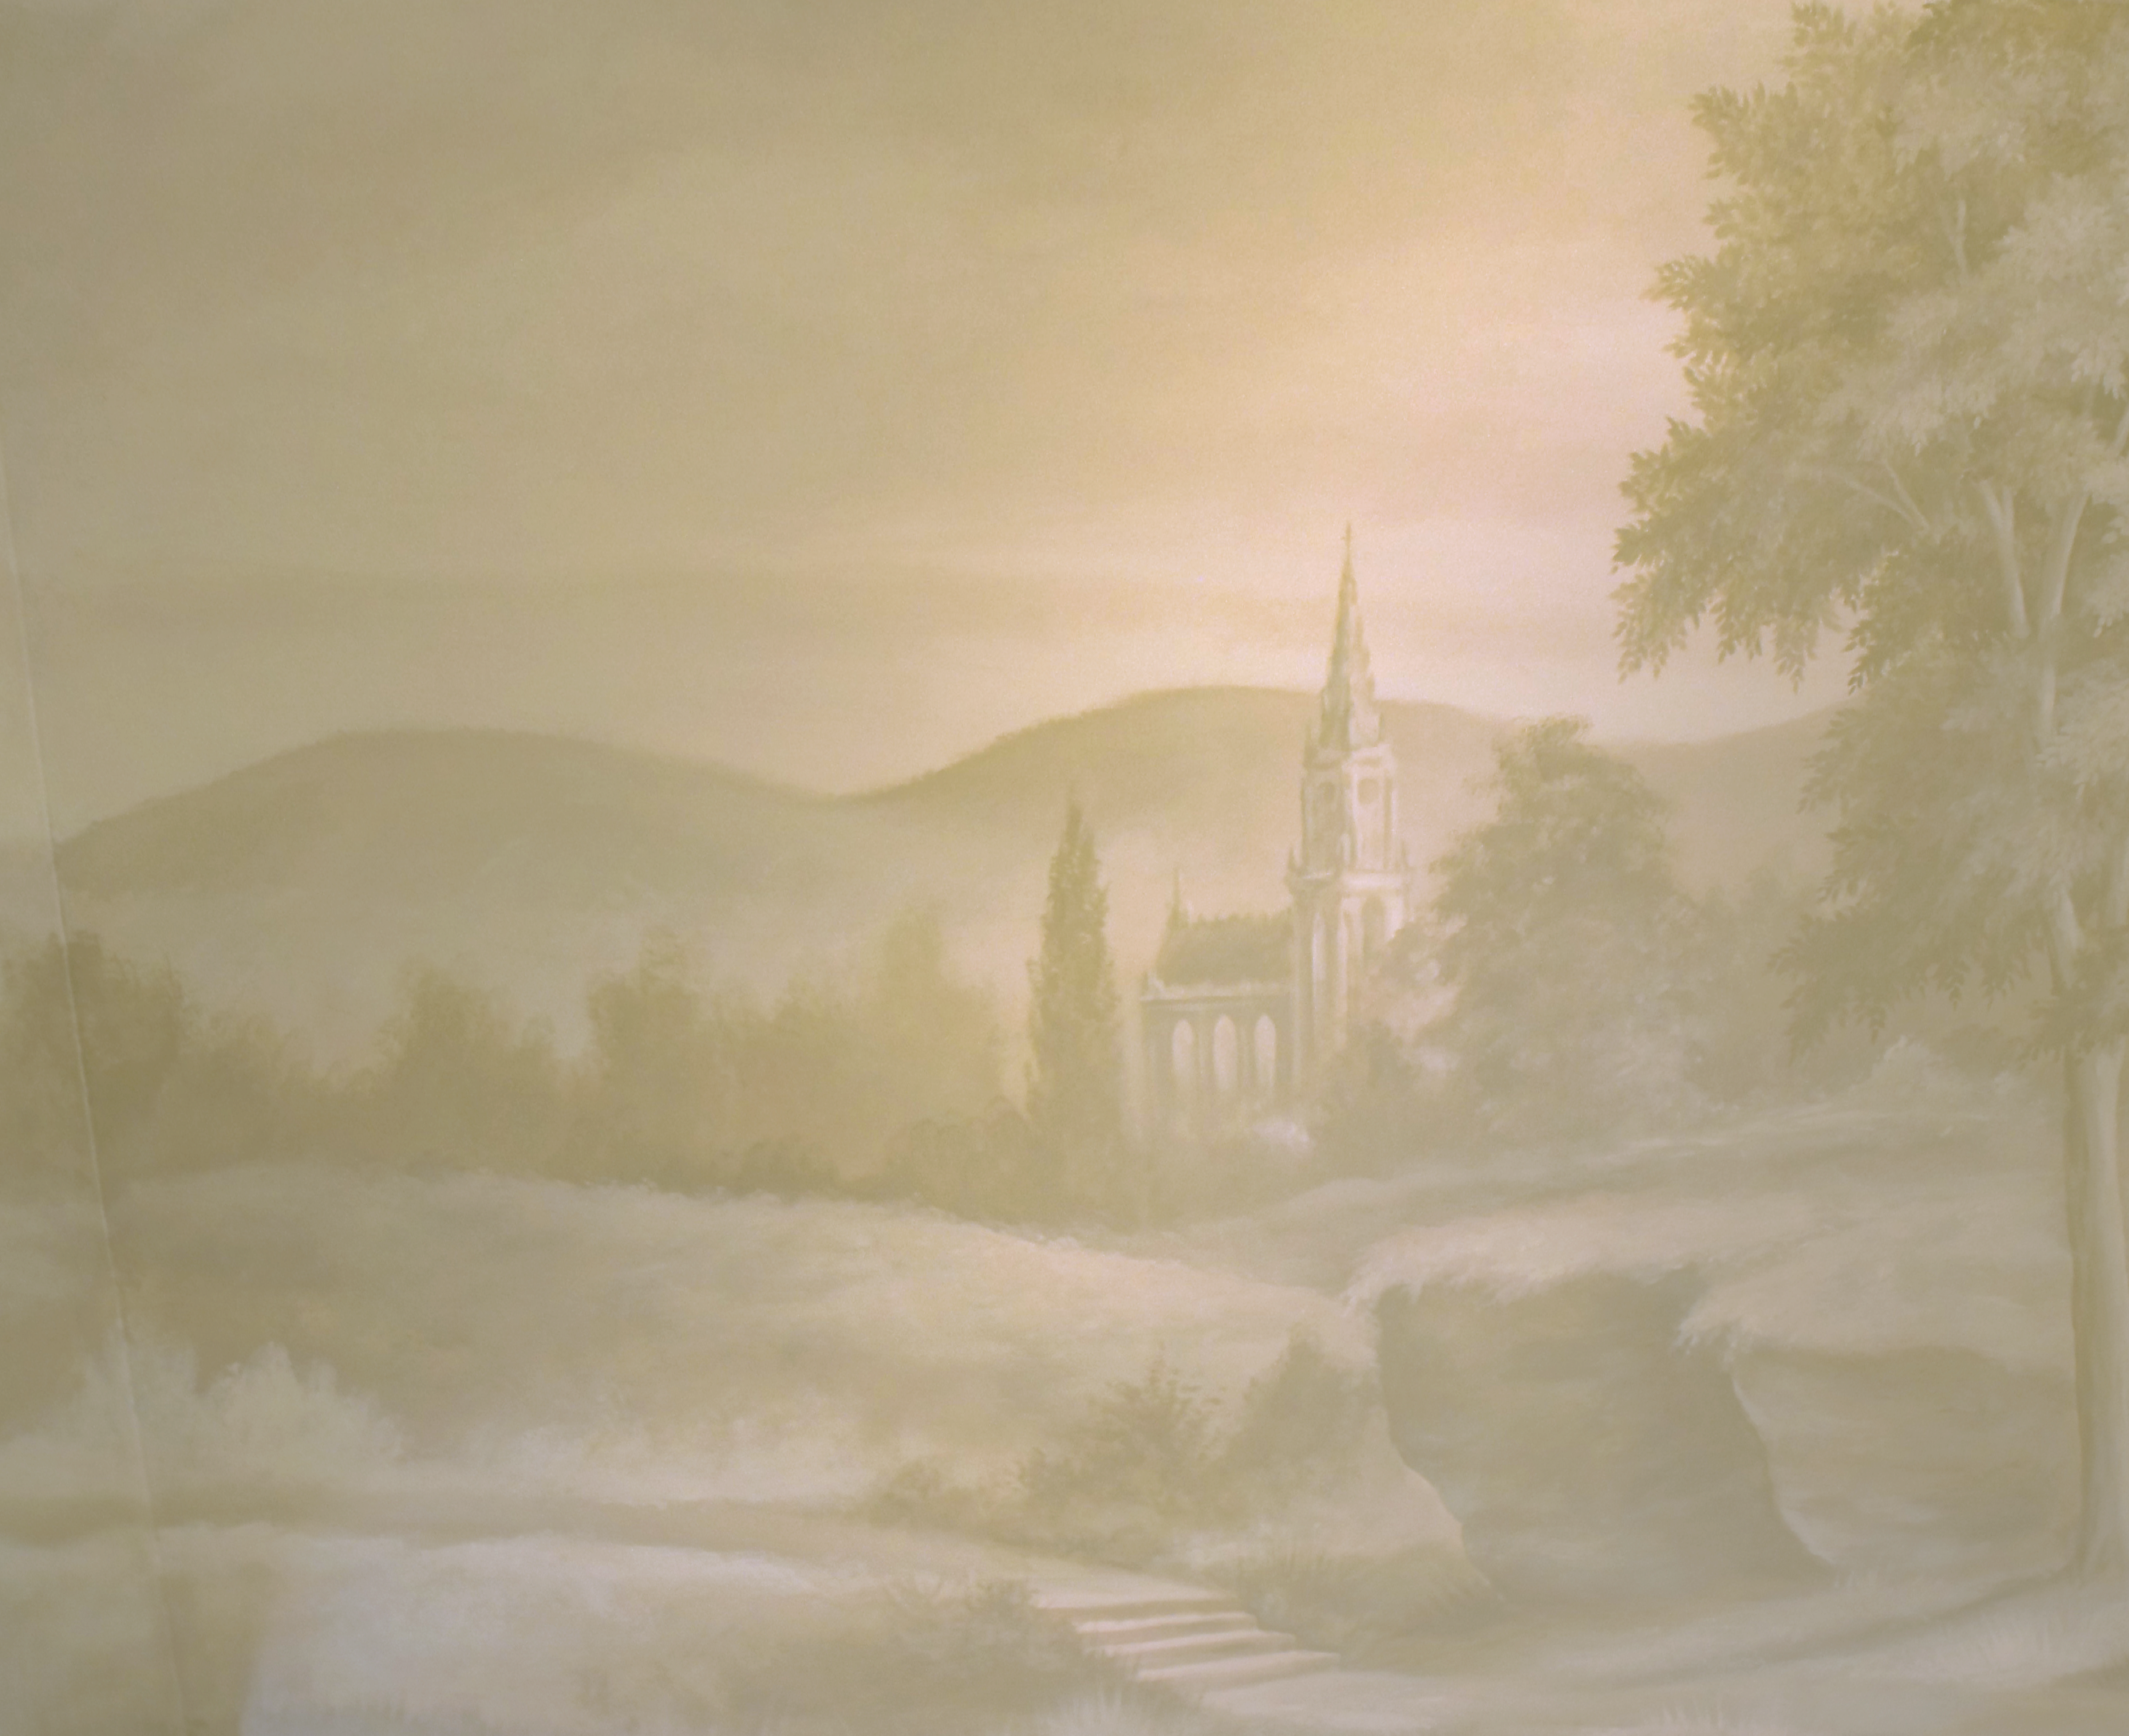 A Painting Of A Church And Trees